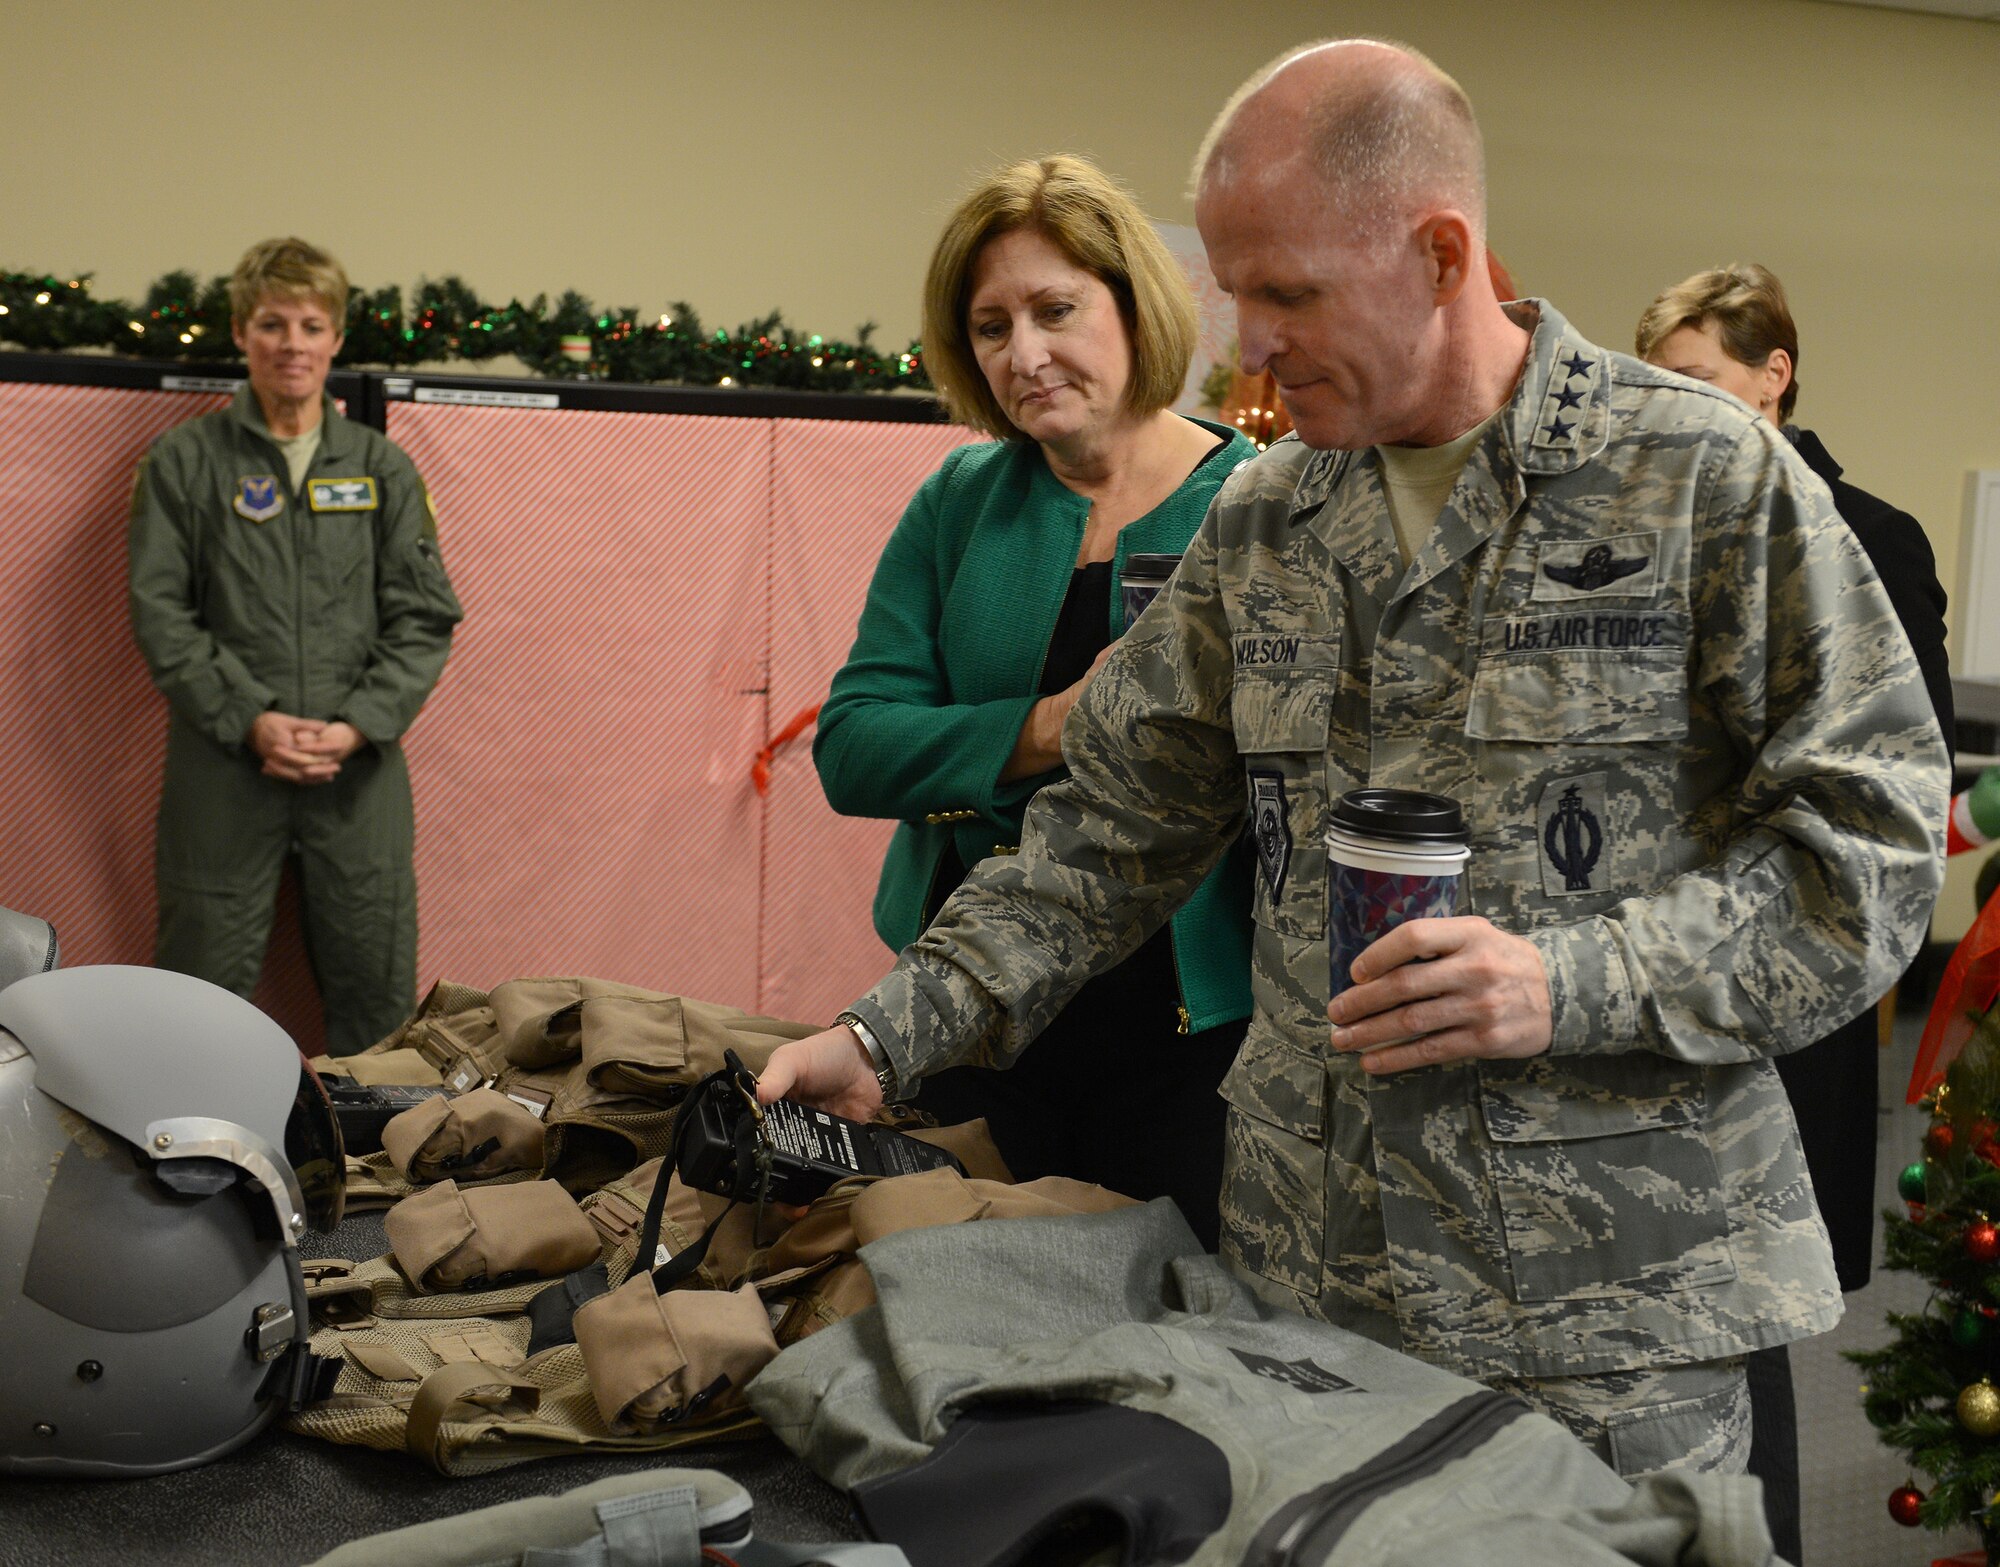 Lt. Gen. Stephen Wilson, commander of Air Force Global Strike Command, and his spouse Nancy, look at equipment aircrew members use during a visit to the 2nd Operations Support Squadron on Barksdale Air Force Base, La., Dec. 17, 2014. The Aircrew Flight Equipment section provides aircrew with the proper lifesaving equipment used in the event of a crash including helmets, oxygen masks, survival vests, anti-exposure suits, life preservers and night vision goggles. (U.S. Air Force photo/Senior Airman Benjamin Gonsier)